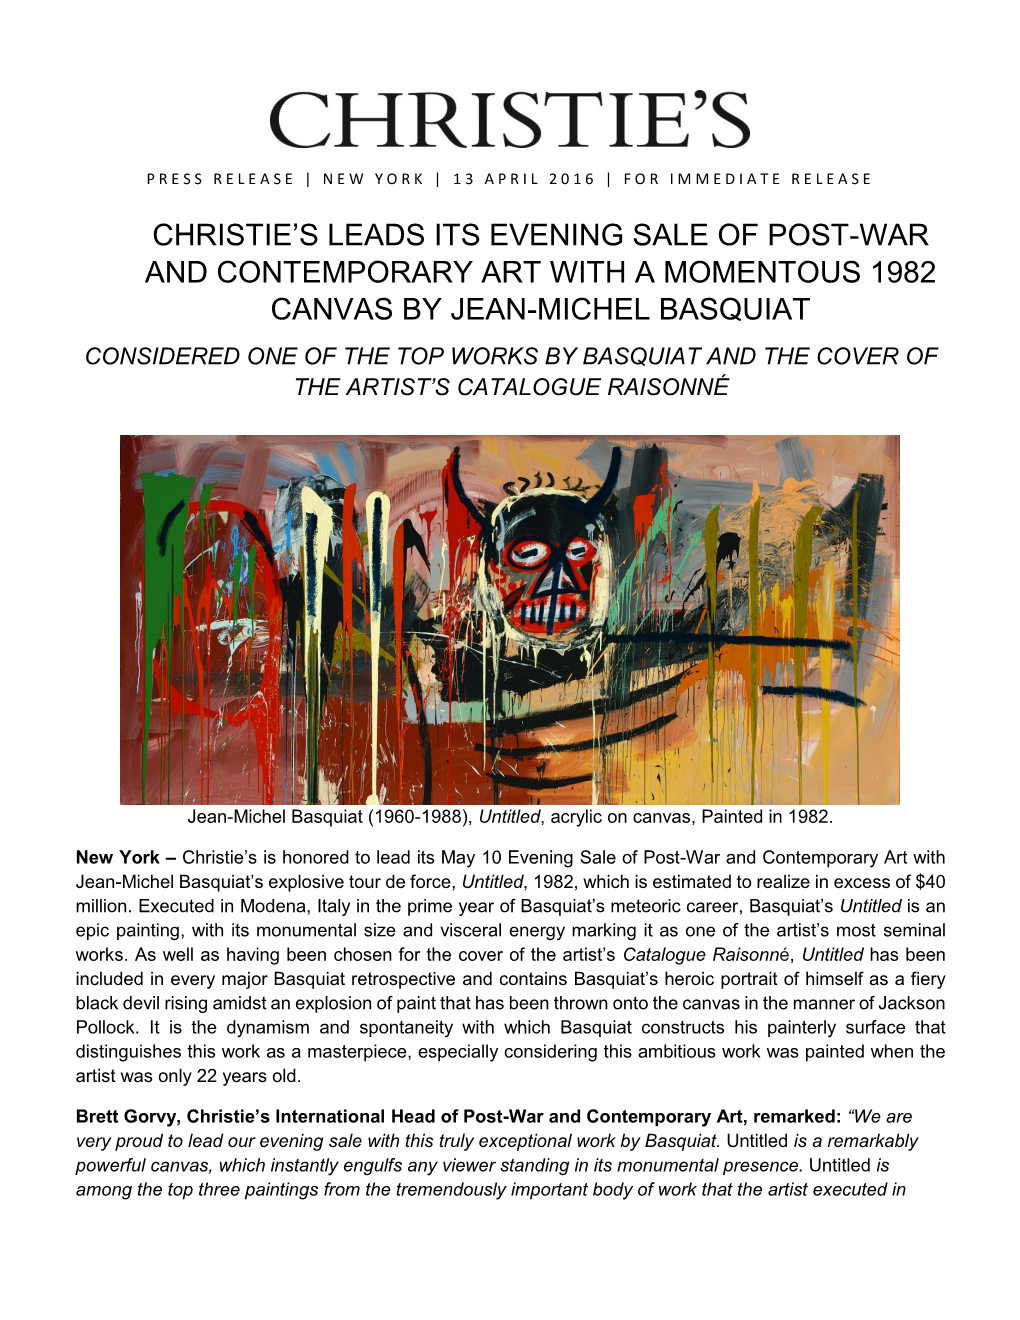 Christie's Leads Its Evening Sale of Post-War And